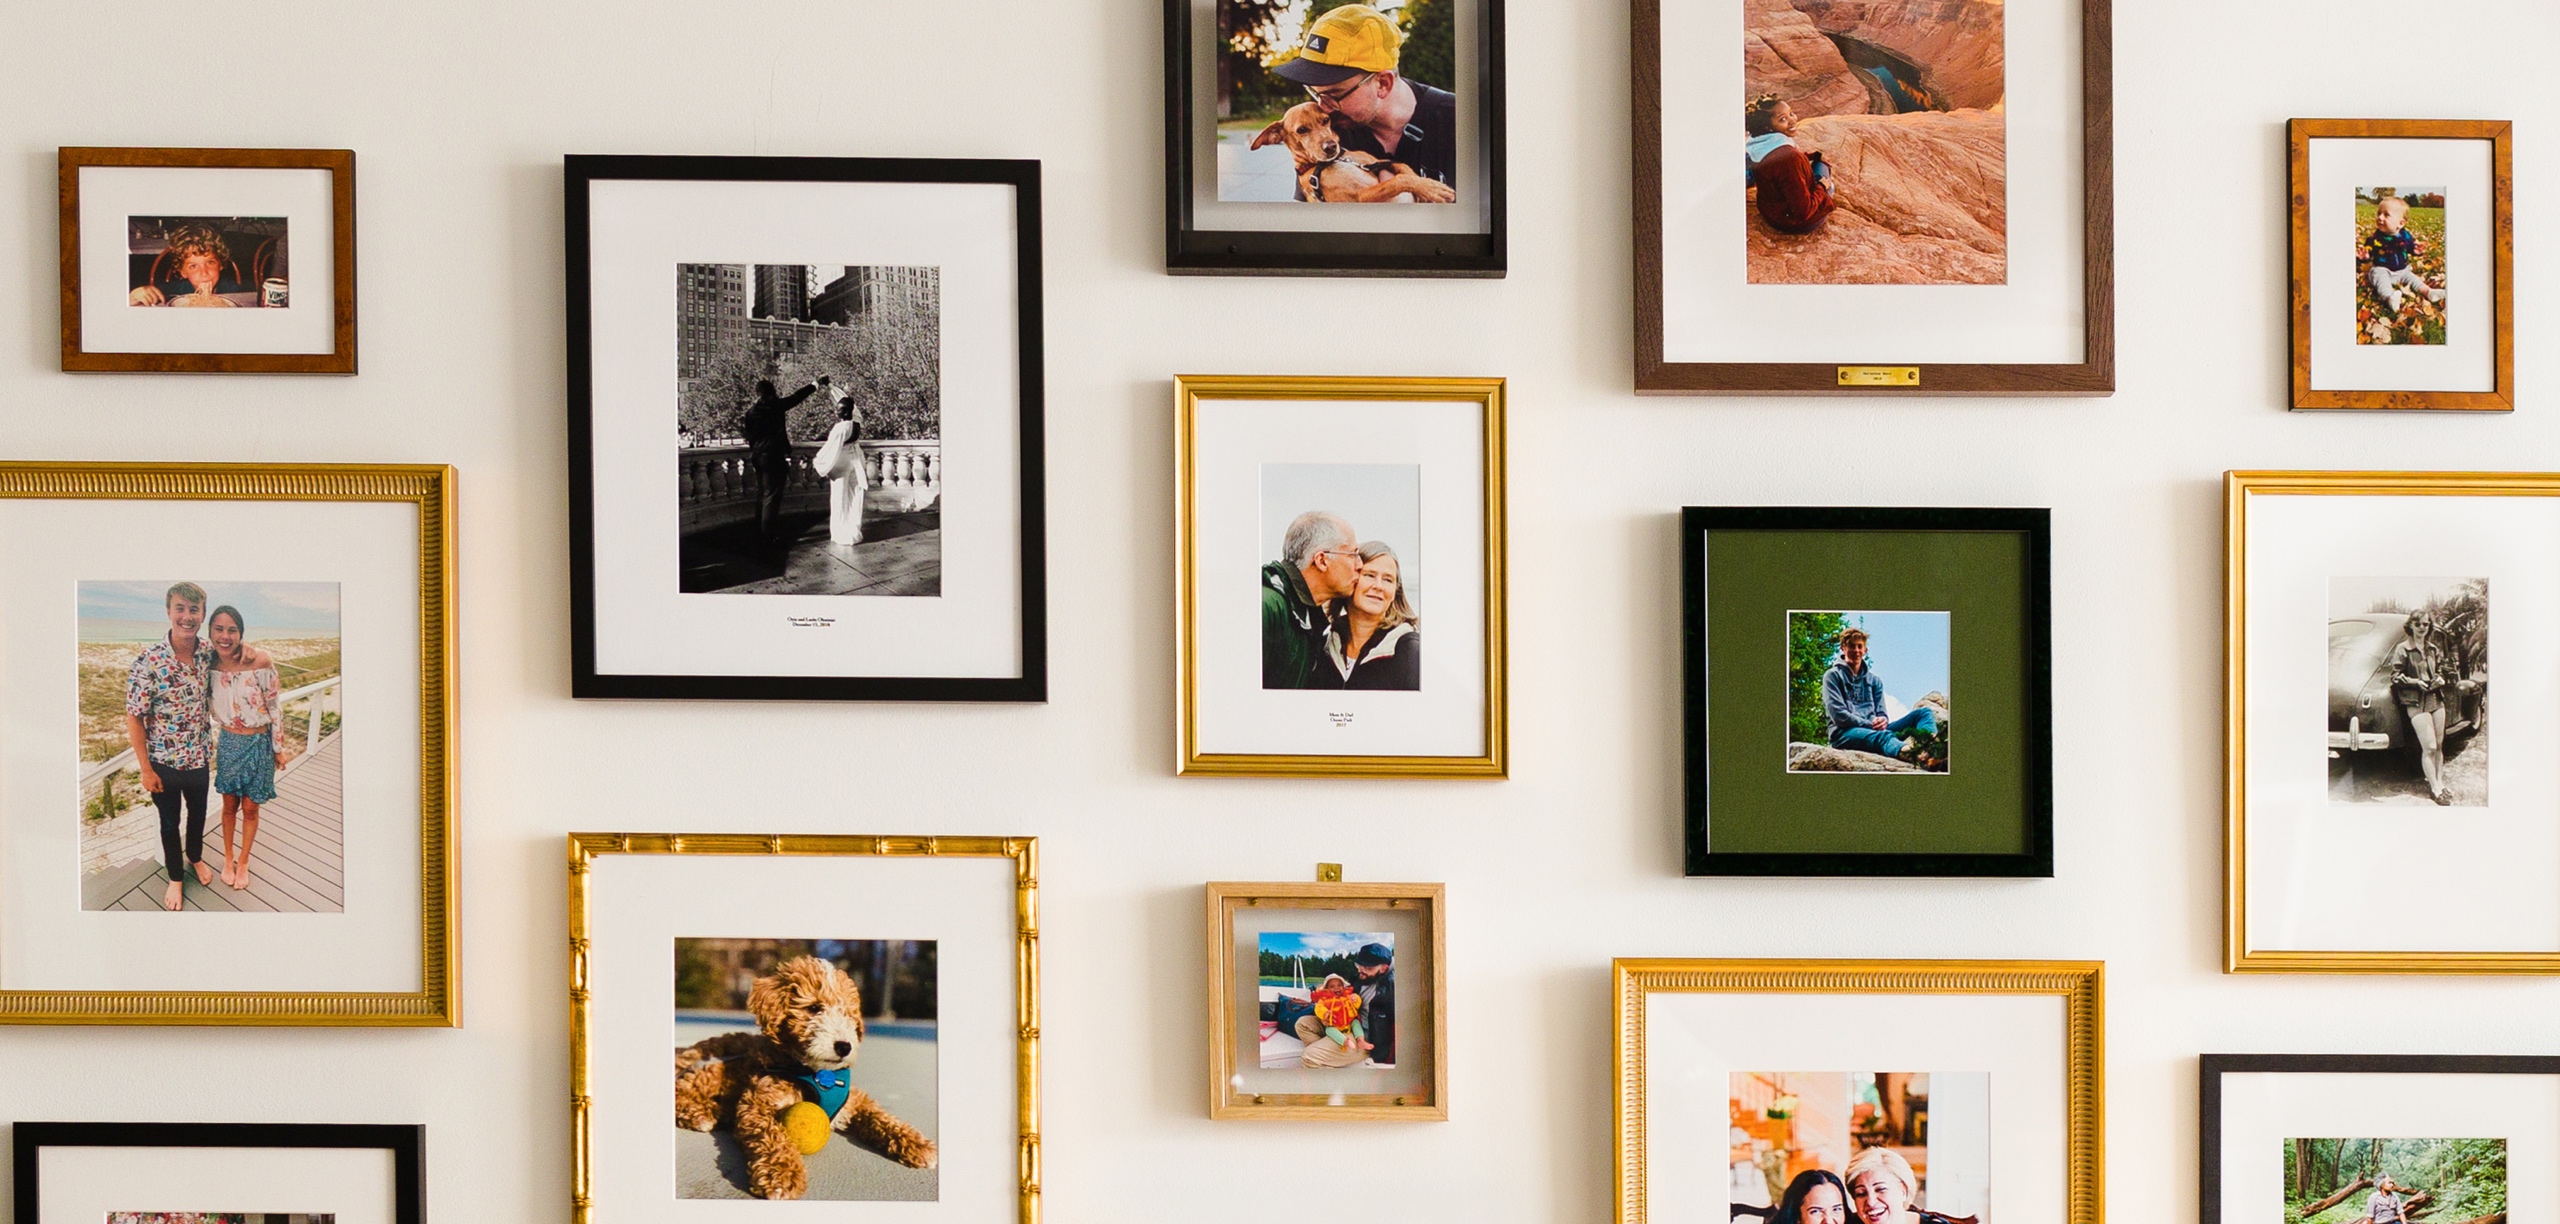 custom frames online: Putting Your Style On Display